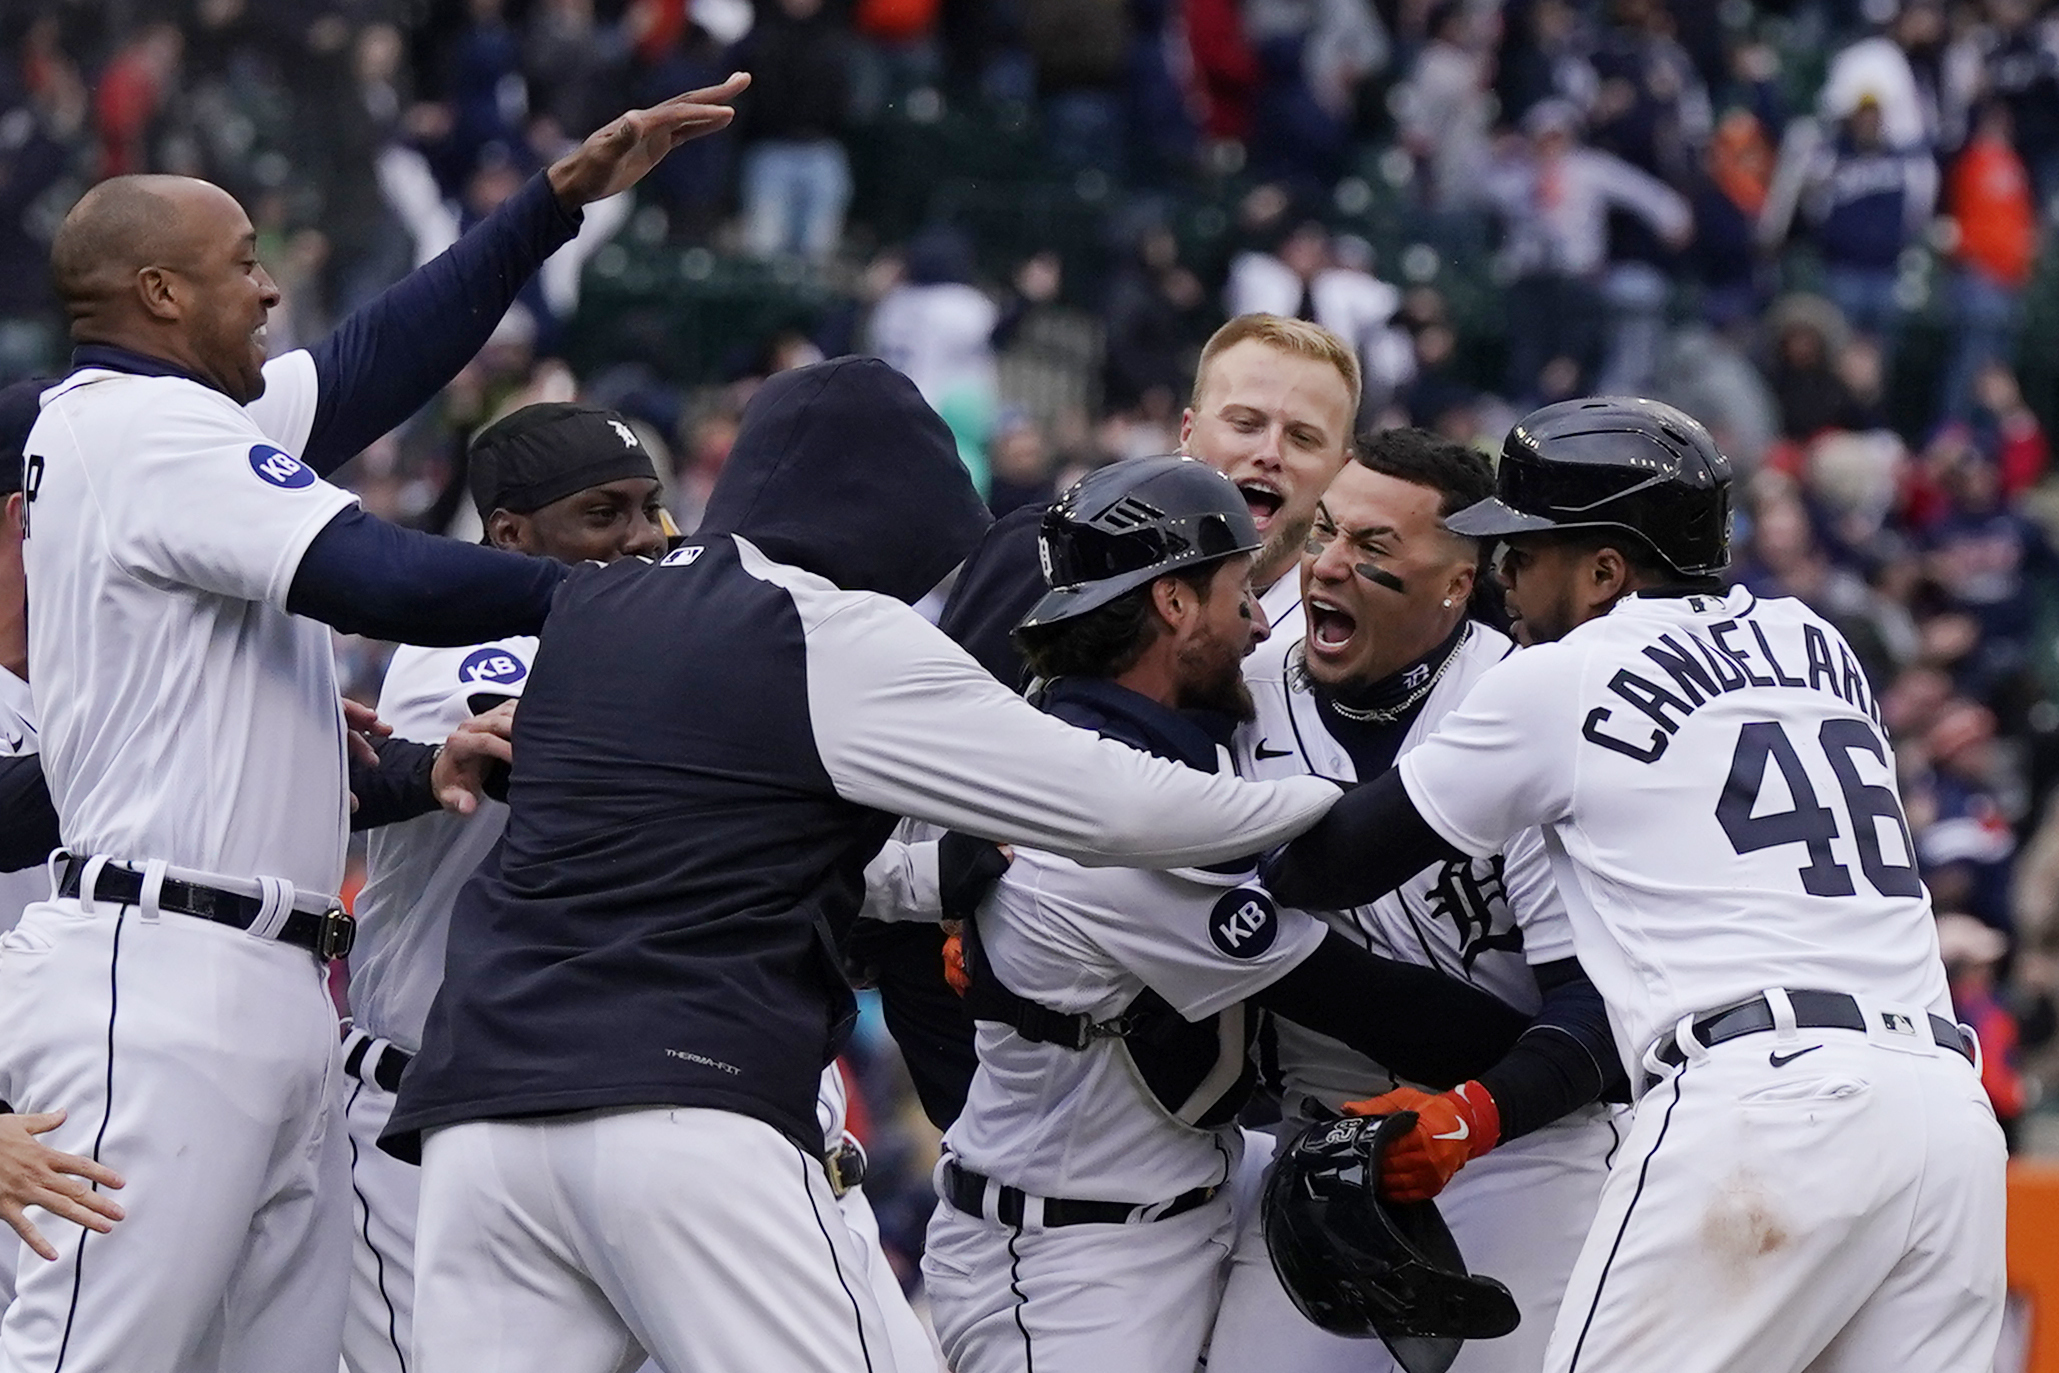 Javier Baez blasts Detroit Tigers to 3-1 win over Boston Red Sox